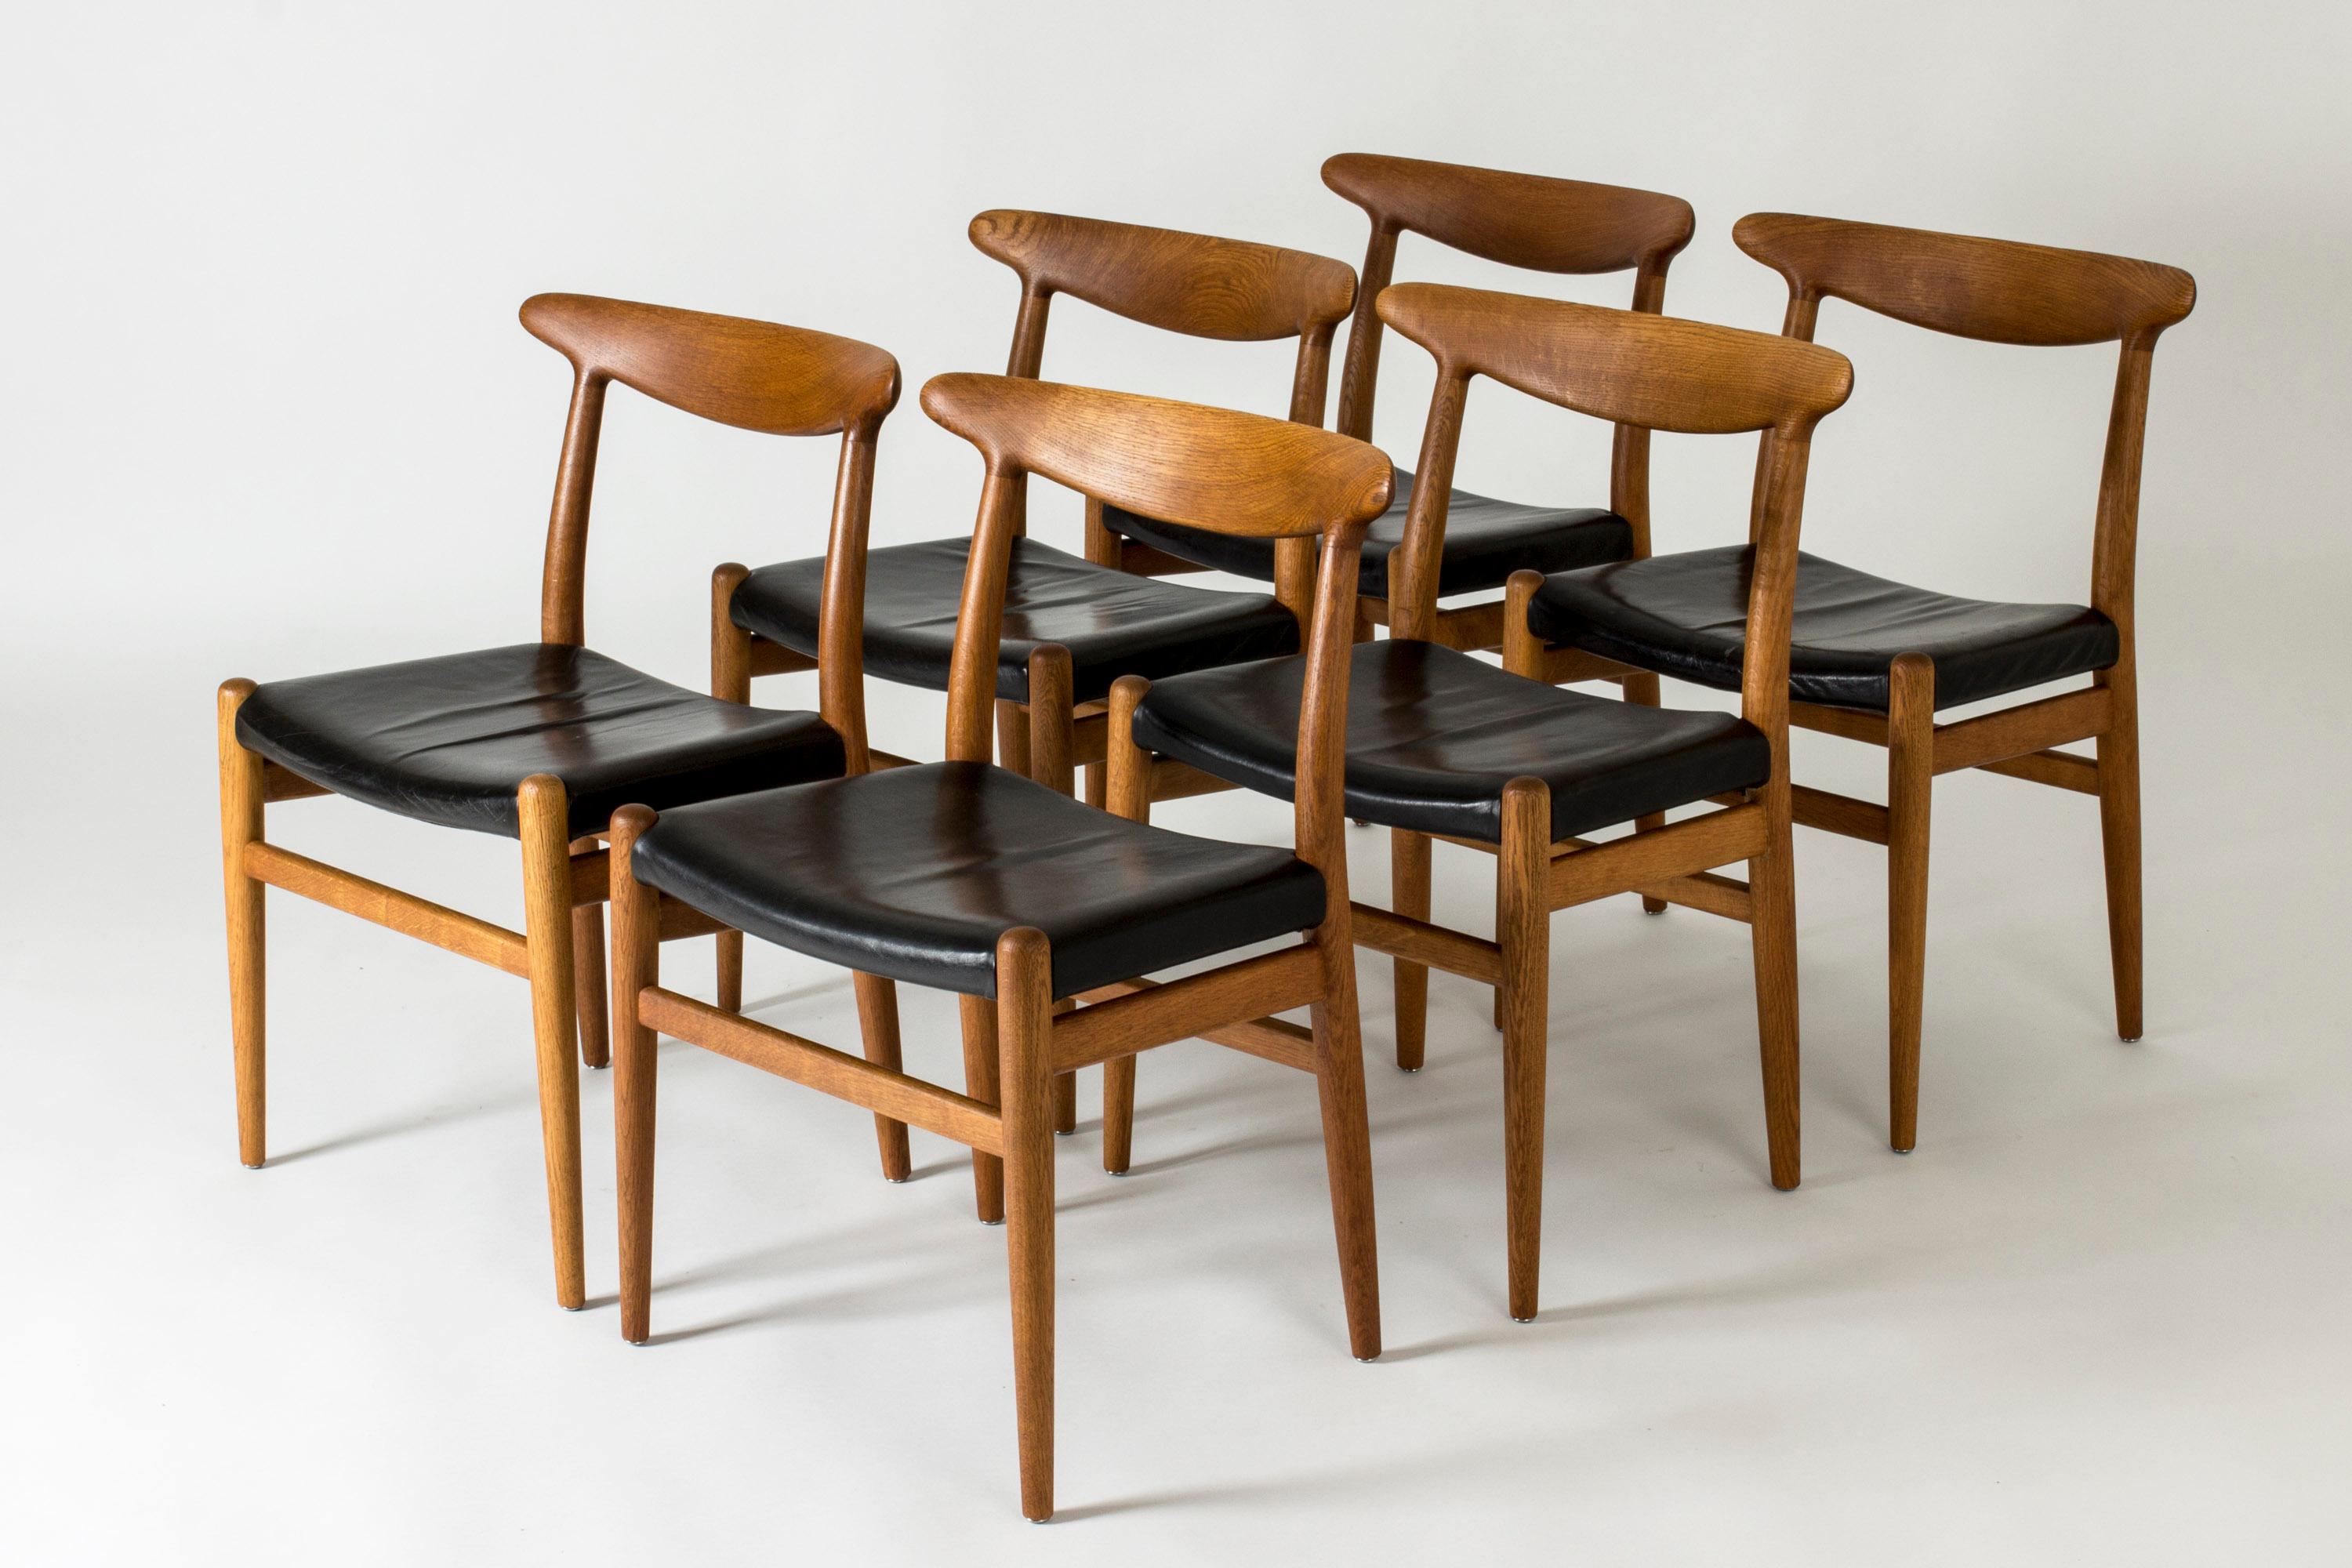 Set of six beautiful “W2” dining chairs by Hans J. Wegner, made from oak with black leather seats. Great woodgrain that follows the lines of the seamlessly sculpted backrests.